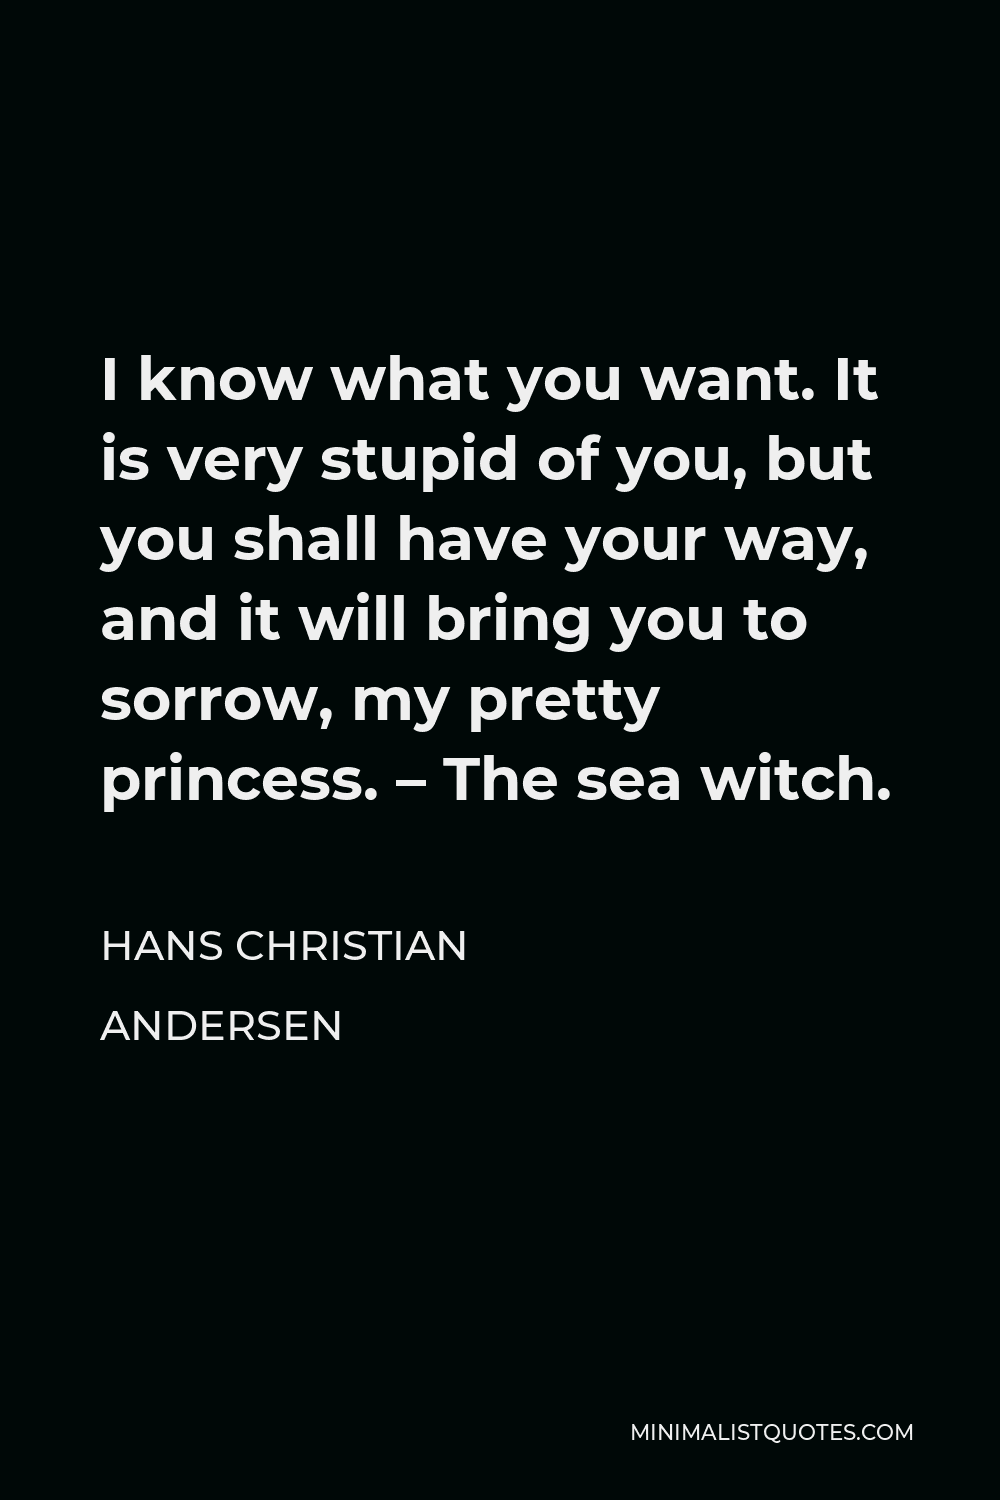 Hans Christian Andersen Quote - I know what you want. It is very stupid of you, but you shall have your way, and it will bring you to sorrow, my pretty princess. – The sea witch.